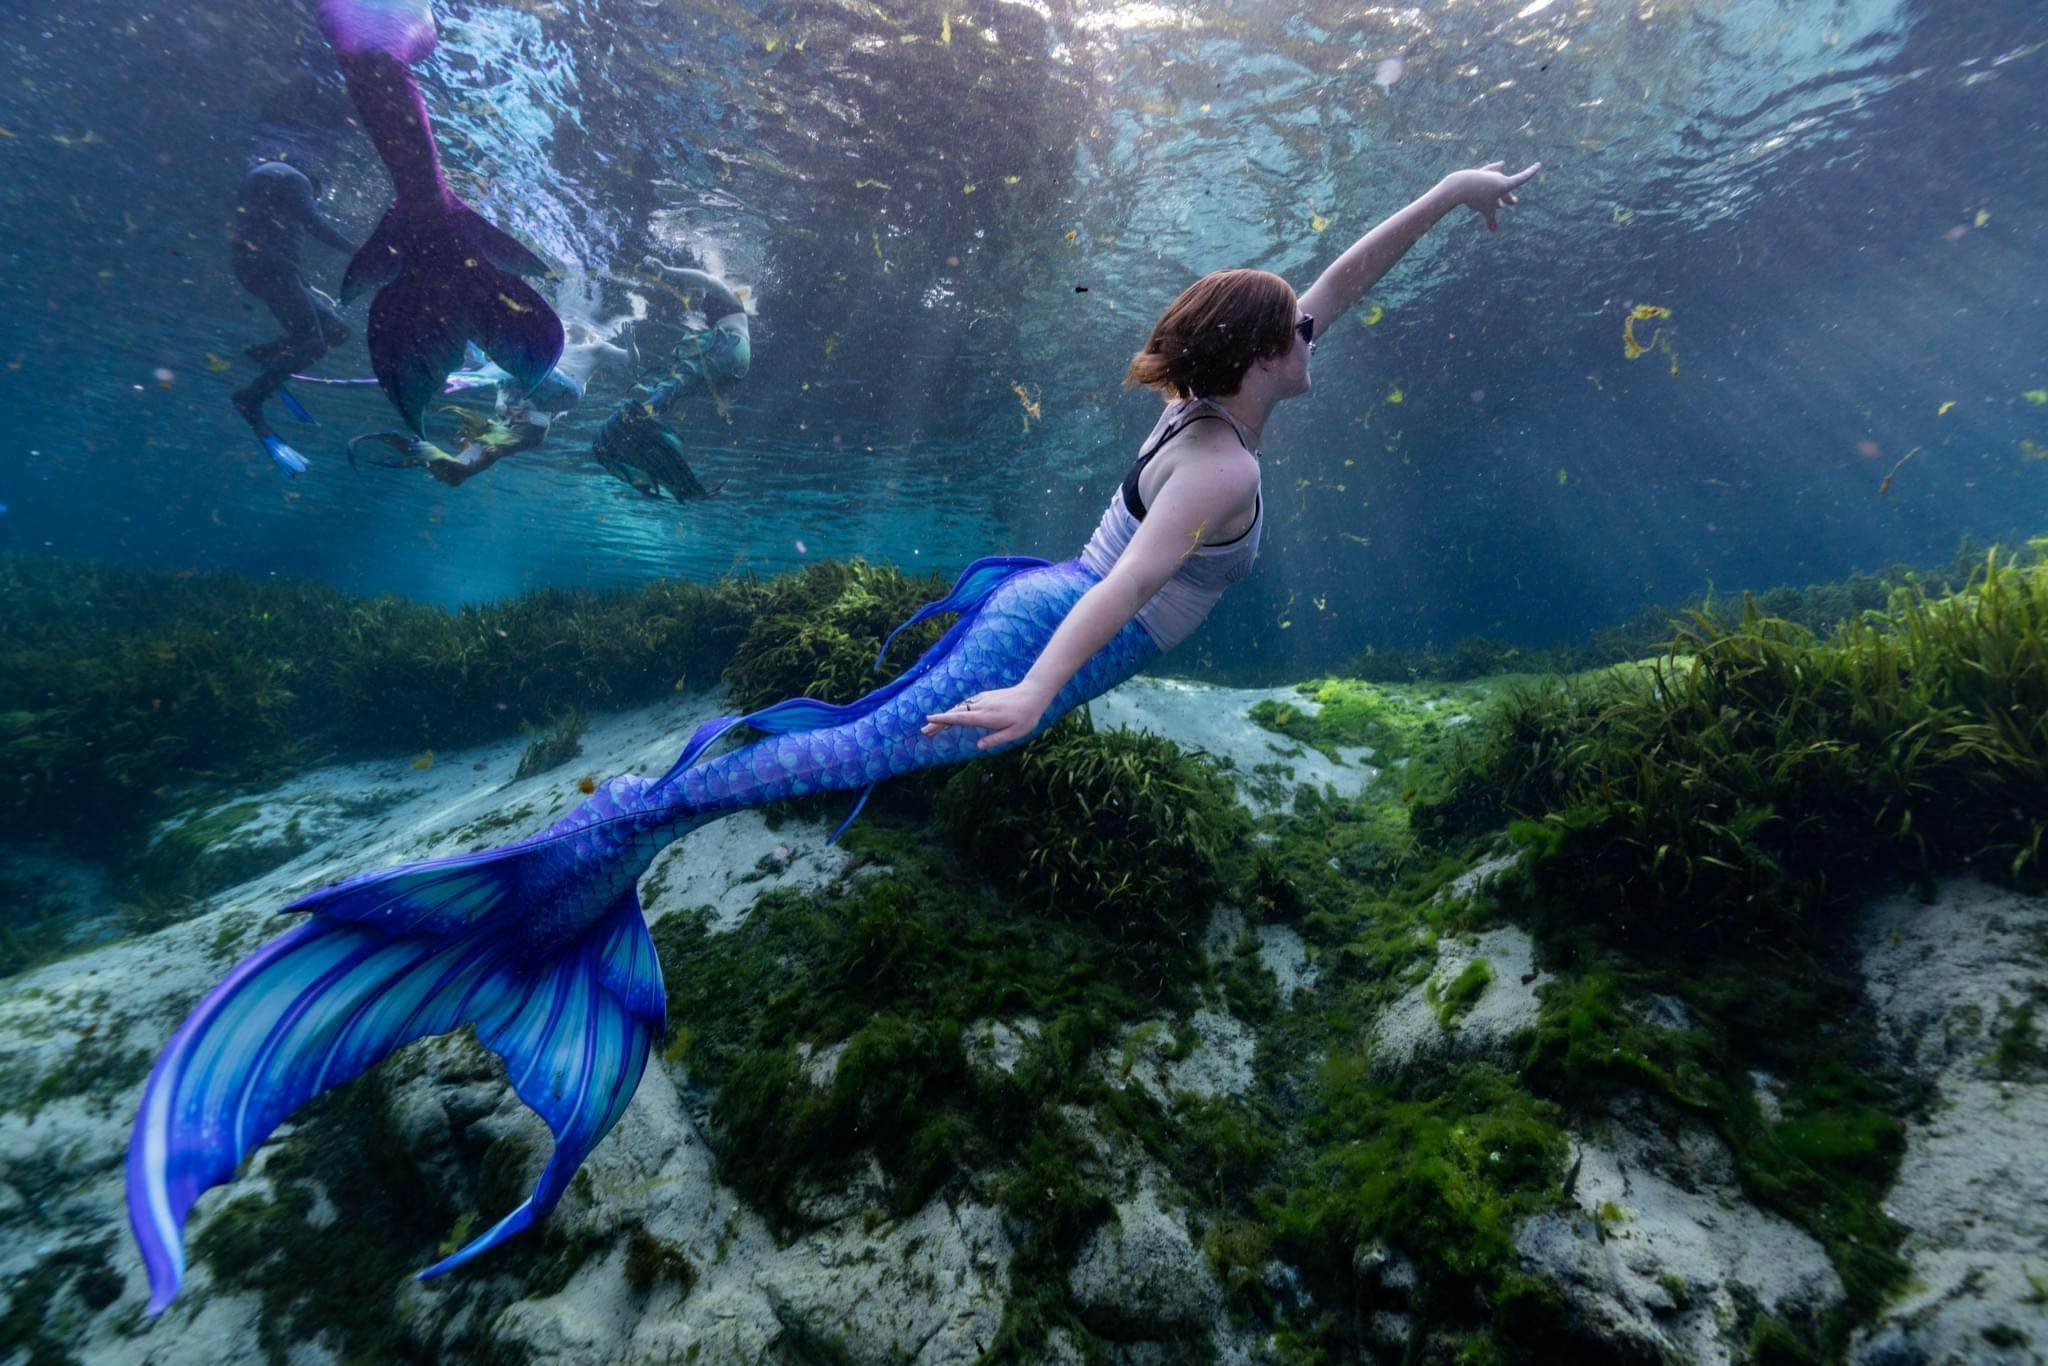 Tights will help you live out your lifelong dream of being a mermaid